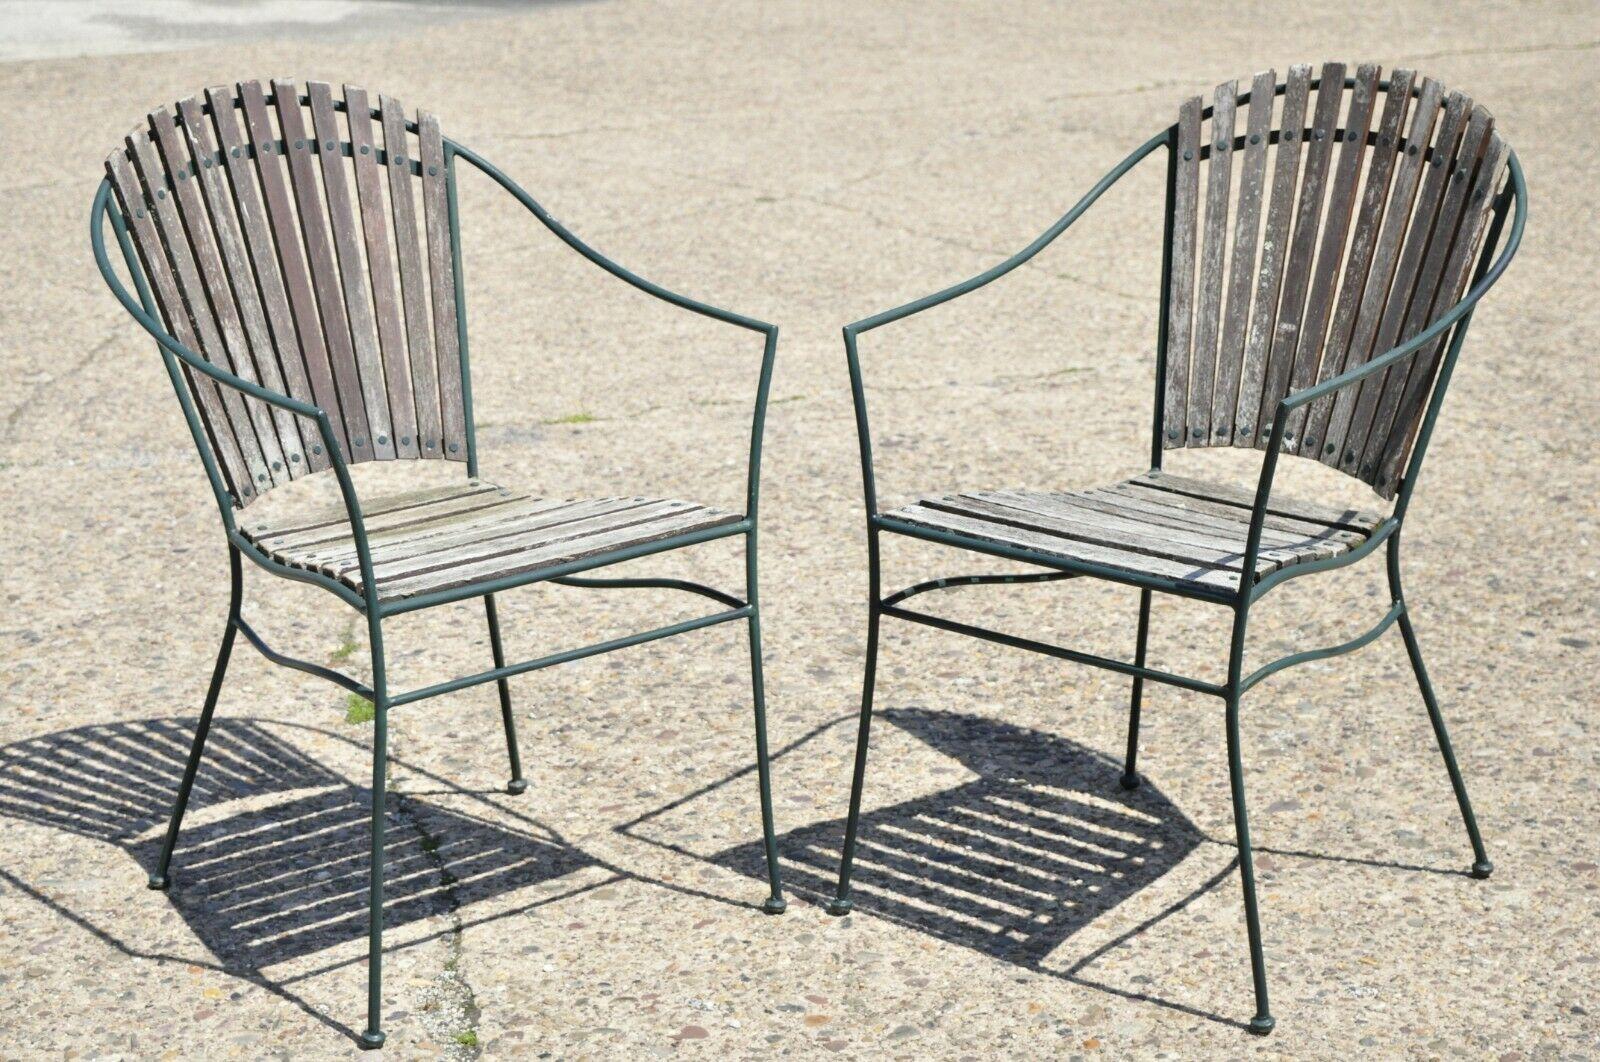 Vintage Wrought Iron and Wood Slat Garden Patio Dining Arm Chairs - Set of 4. Item features (4) armchairs, wrought iron frames, wood slat back and seats, very nice vintage set, sleek sculptural form. Circa Mid to Late 20th Century.
Measurements: